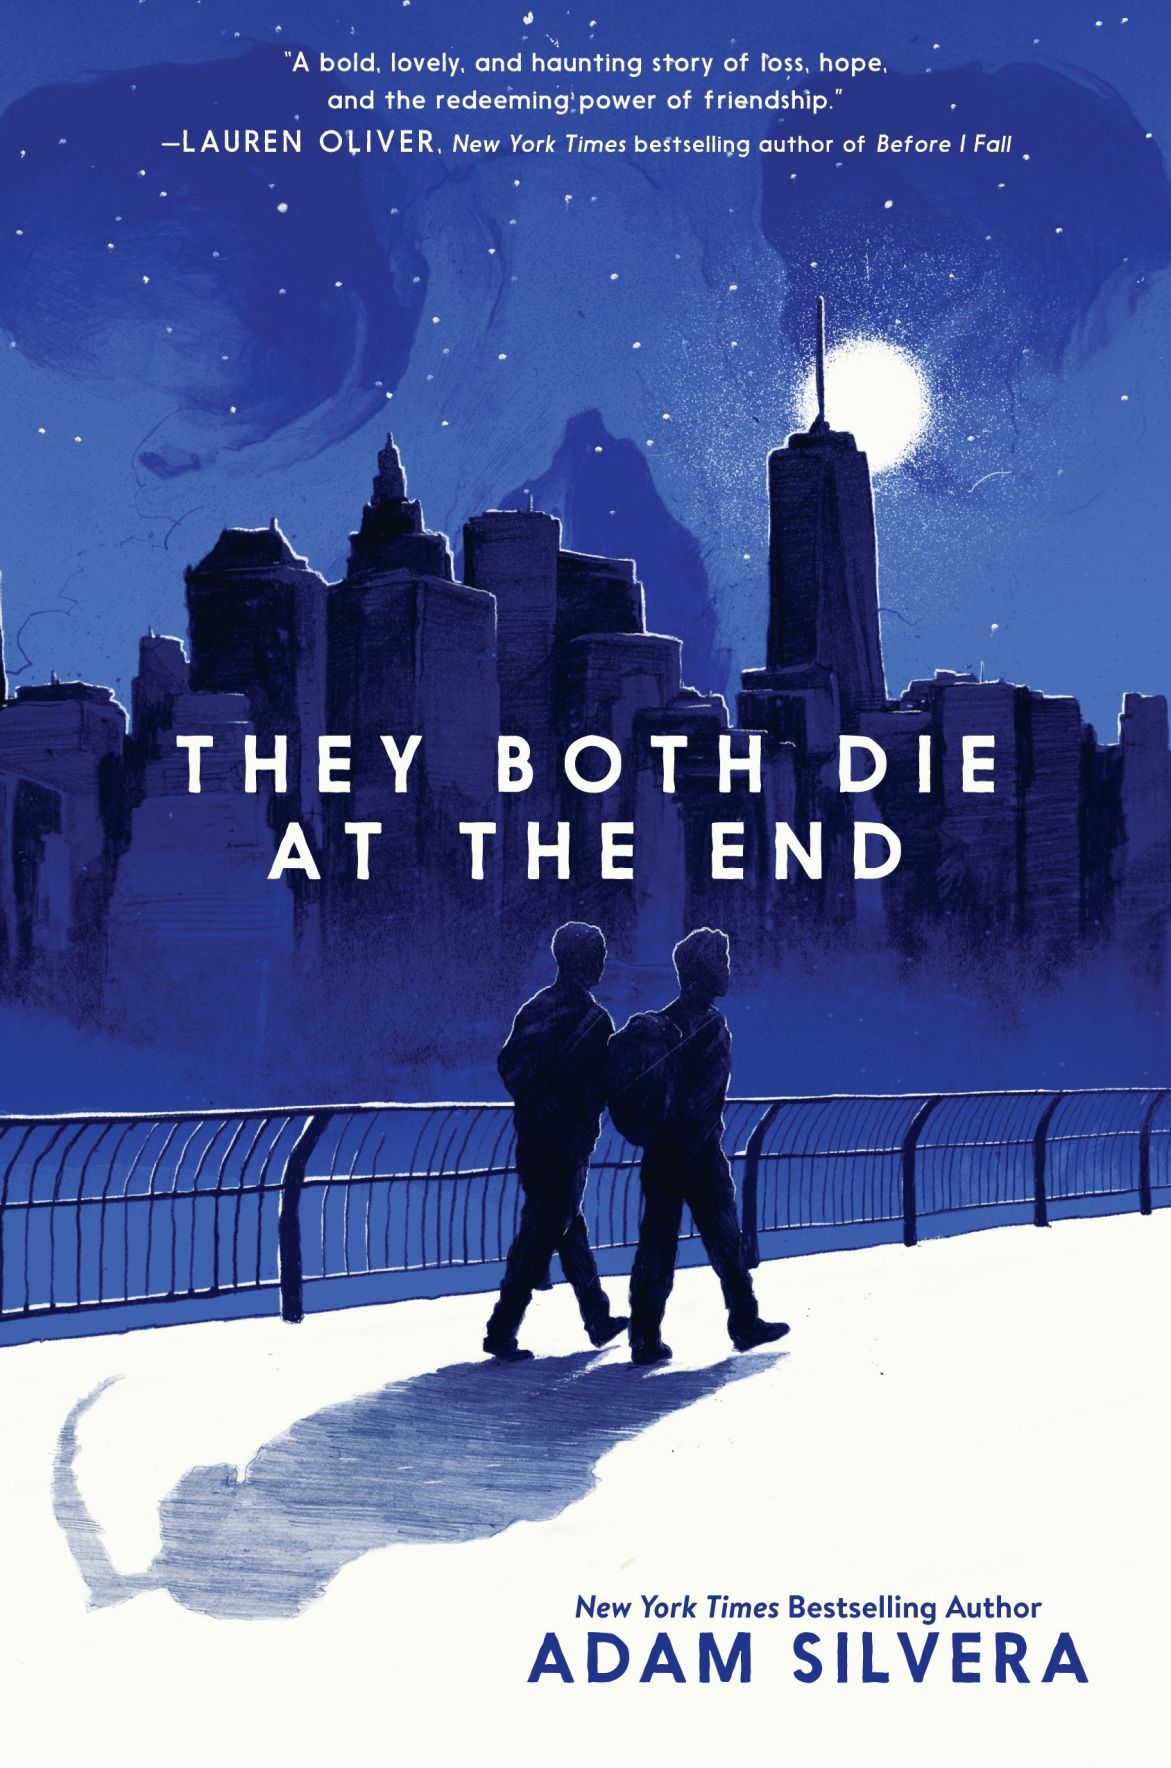 they both die at the end book series